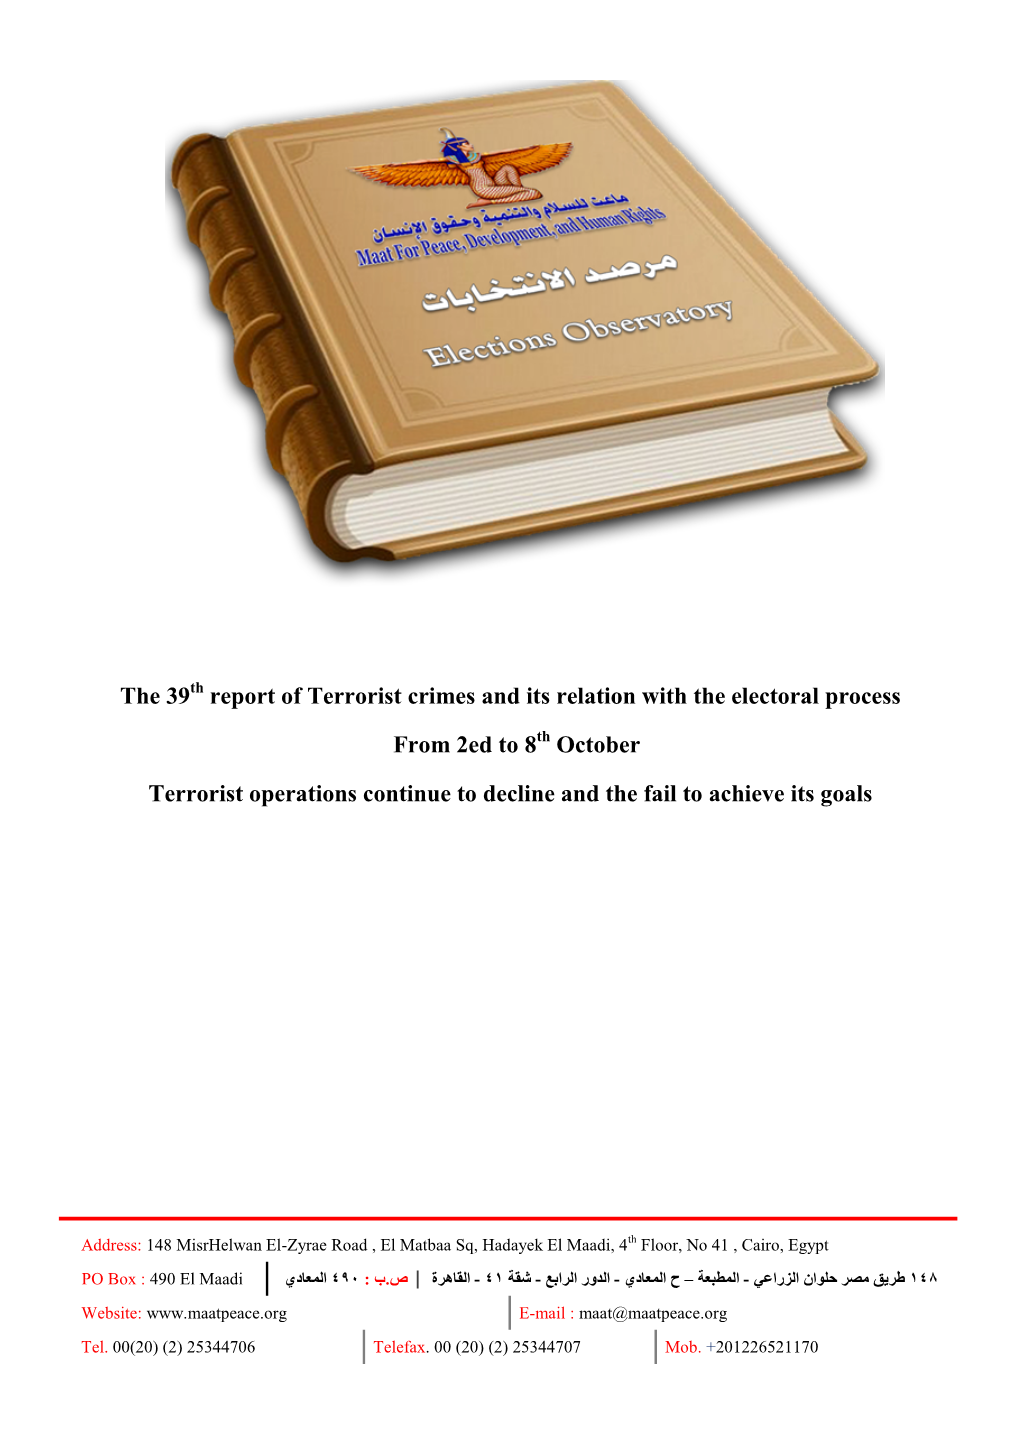 The 39 Report of Terrorist Crimes and Its Relation with the Electoral